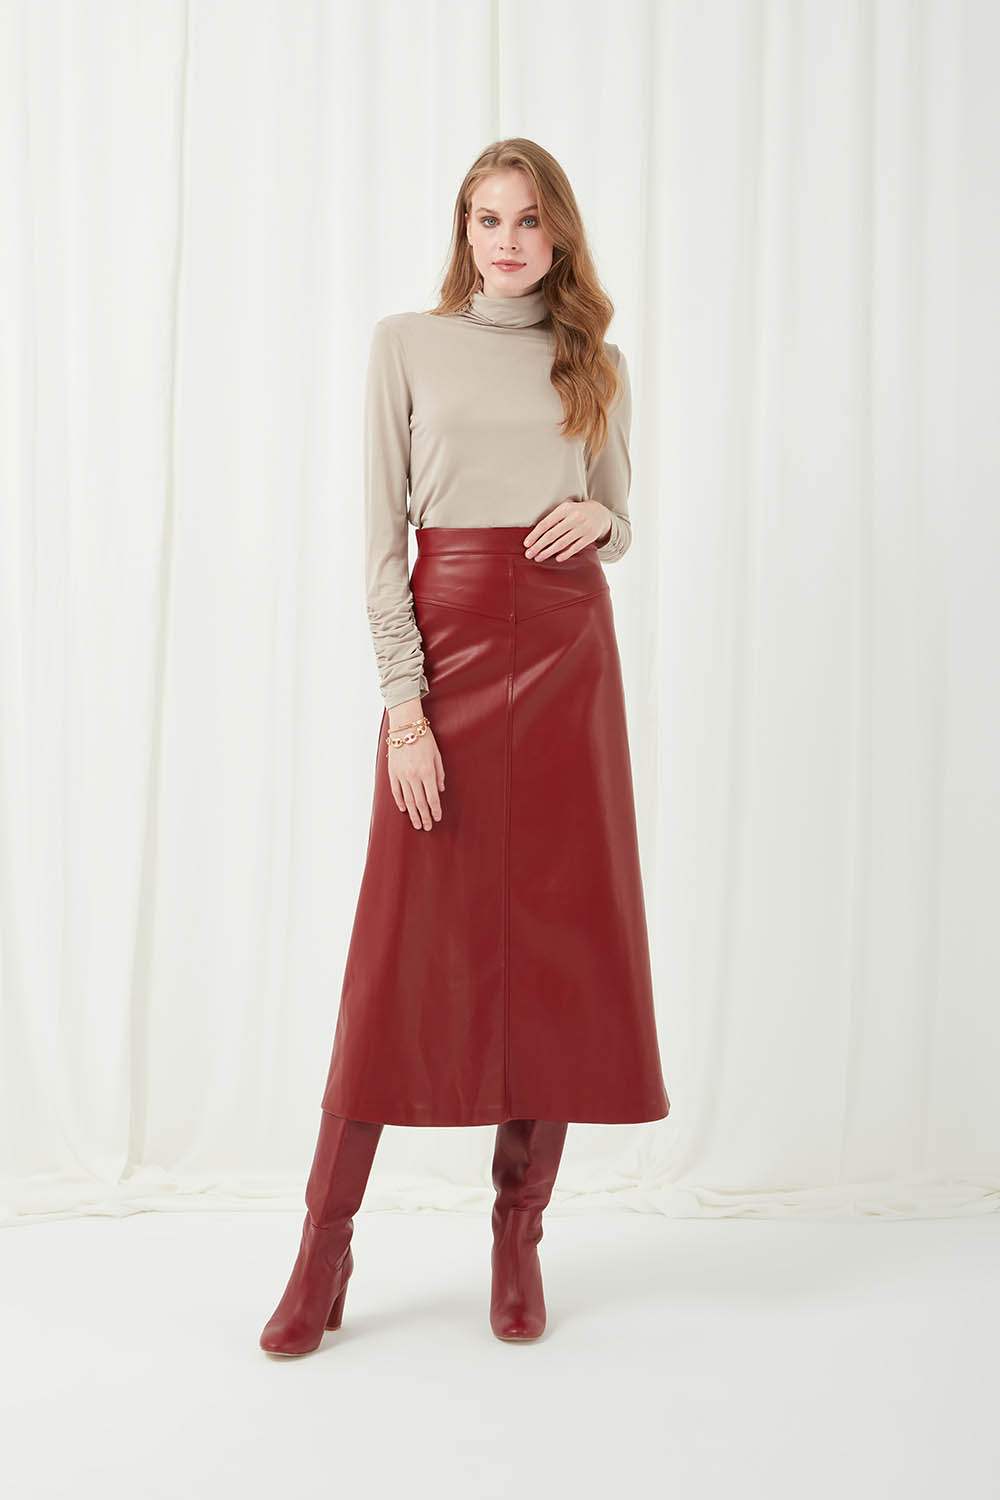 Faux Leather Burgundy Bell Skirt